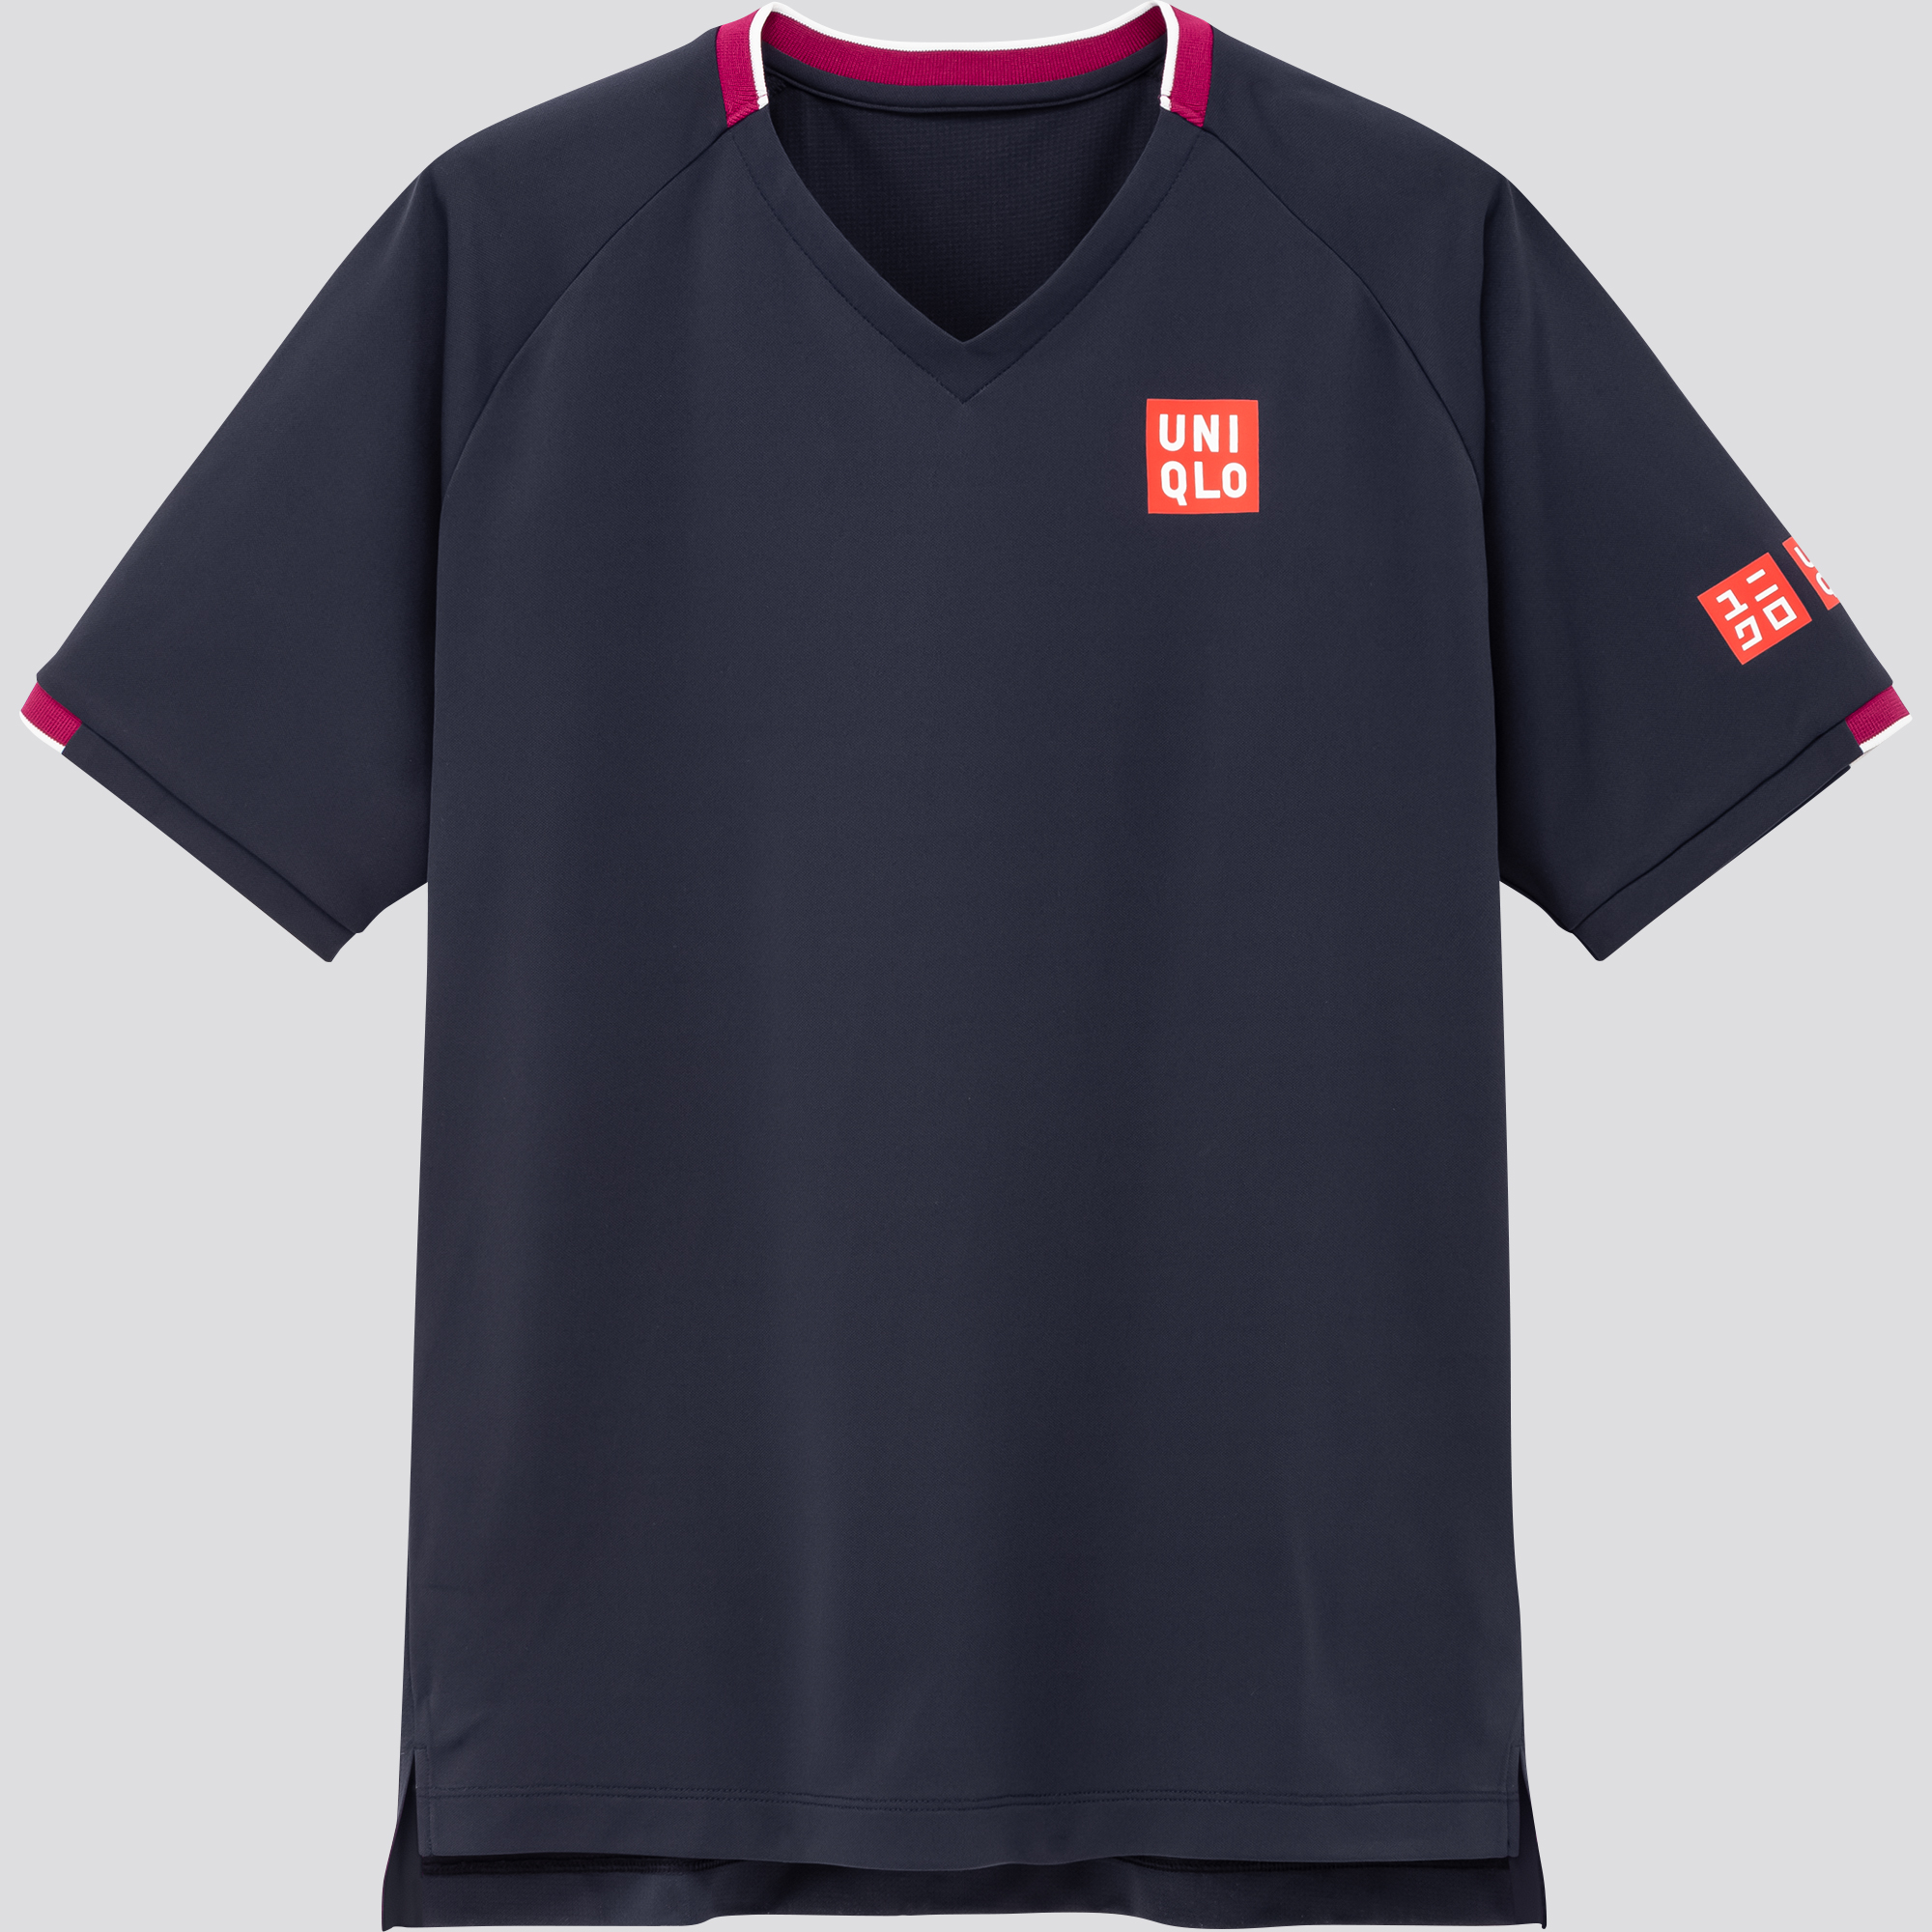 UNIQLO Global Brand Ambassadors to Use Game Wear Made with DRY-EX Material from Recycled PET Bottles Beginning January 2020